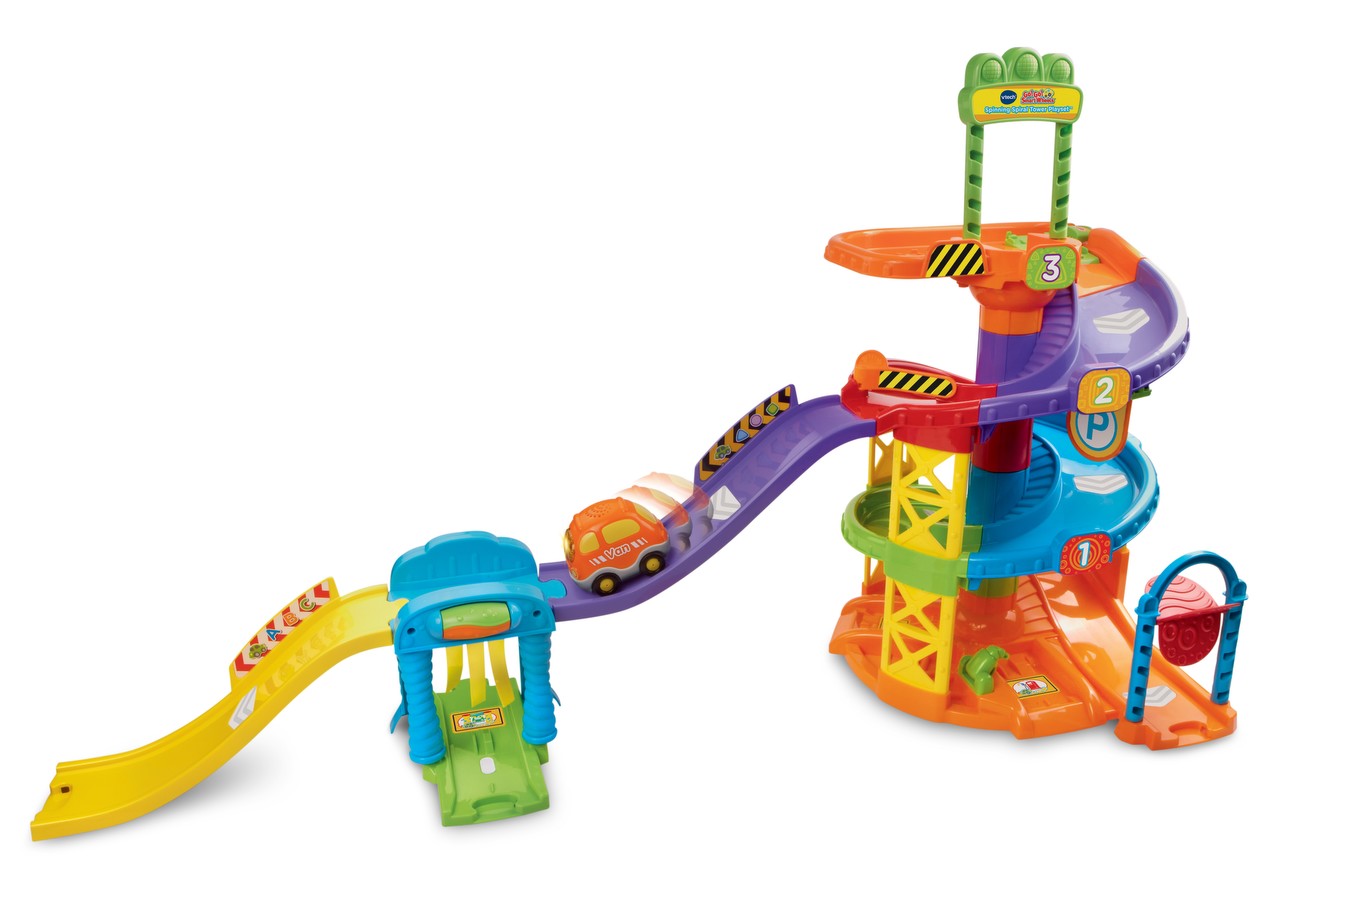 Track Details about   Vtech Go!Go Smart Wheels Spinning Spiral Tower Playset Replacement Part 